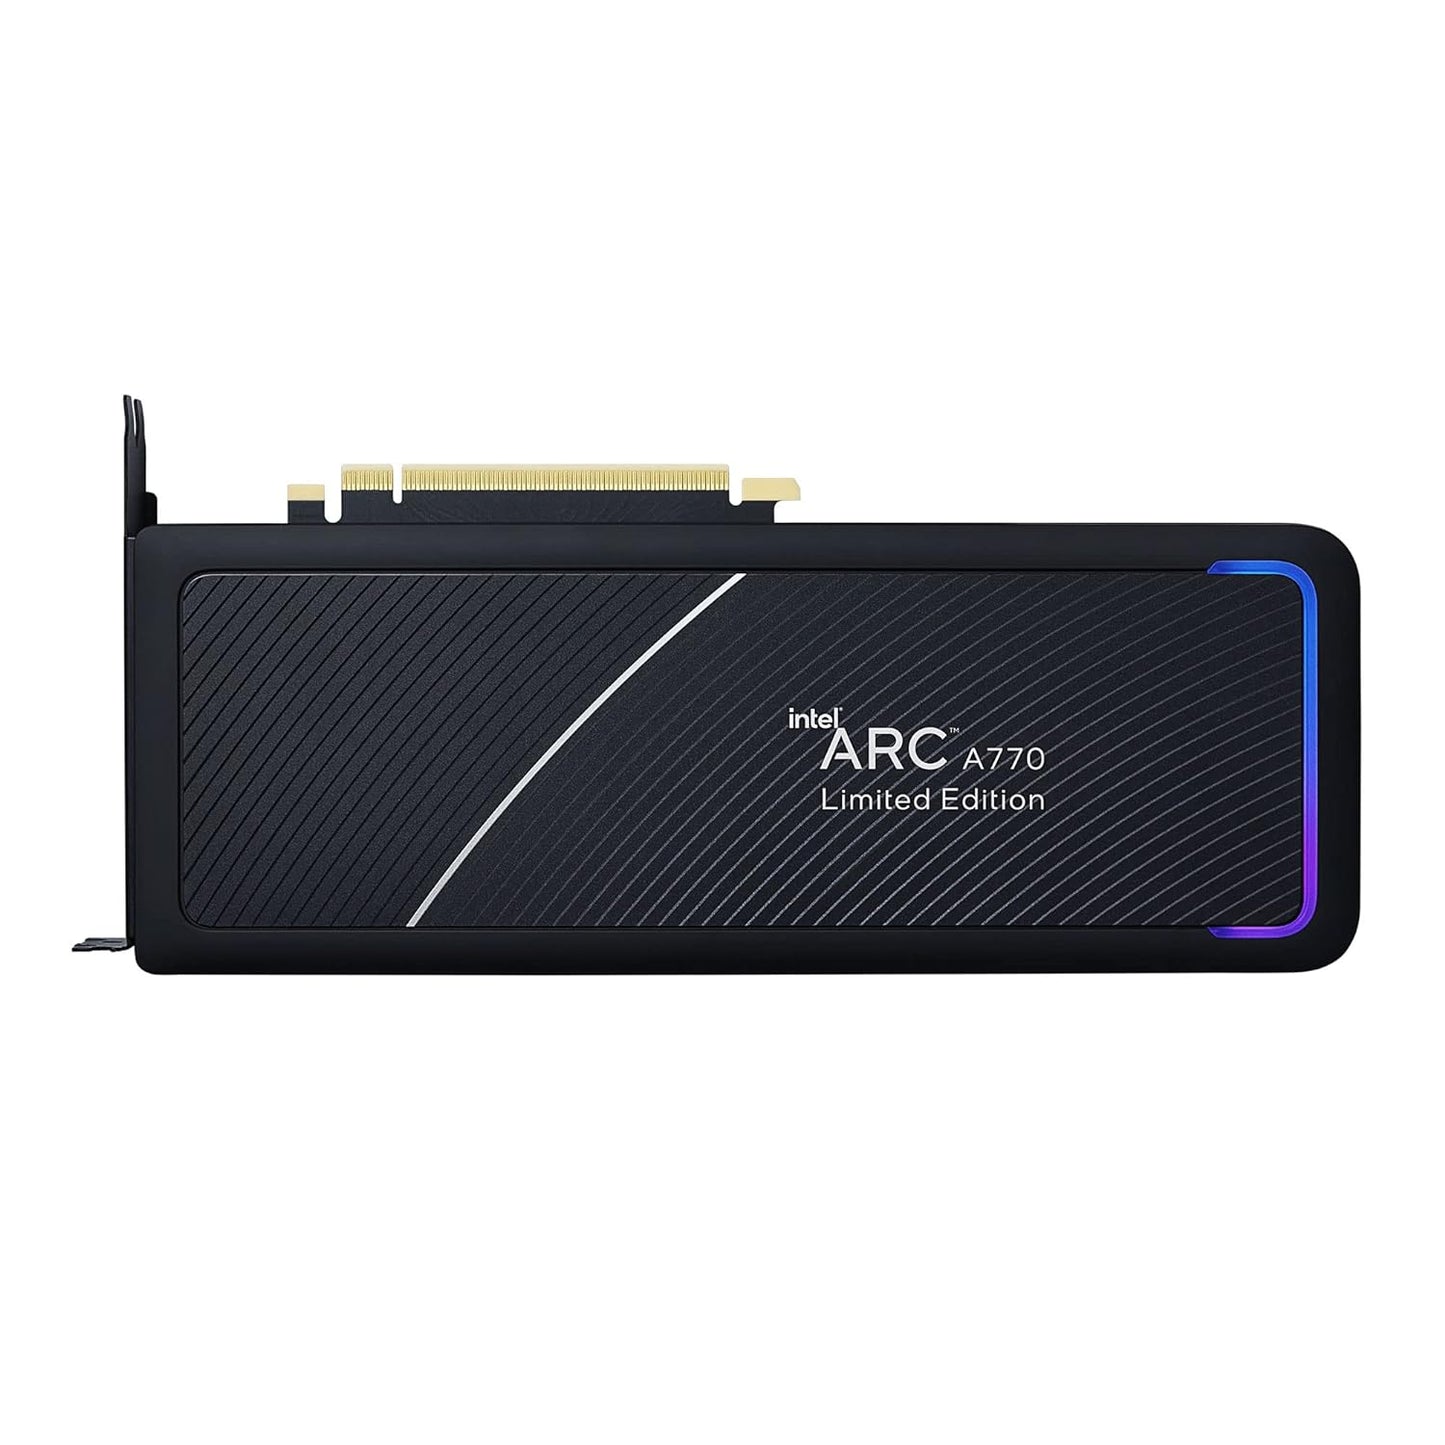 Intel Arc A770 16Gb Pci Express 4.0 DDR6 Graphics Card-GRAPHICS CARD-INTEL-computerspace